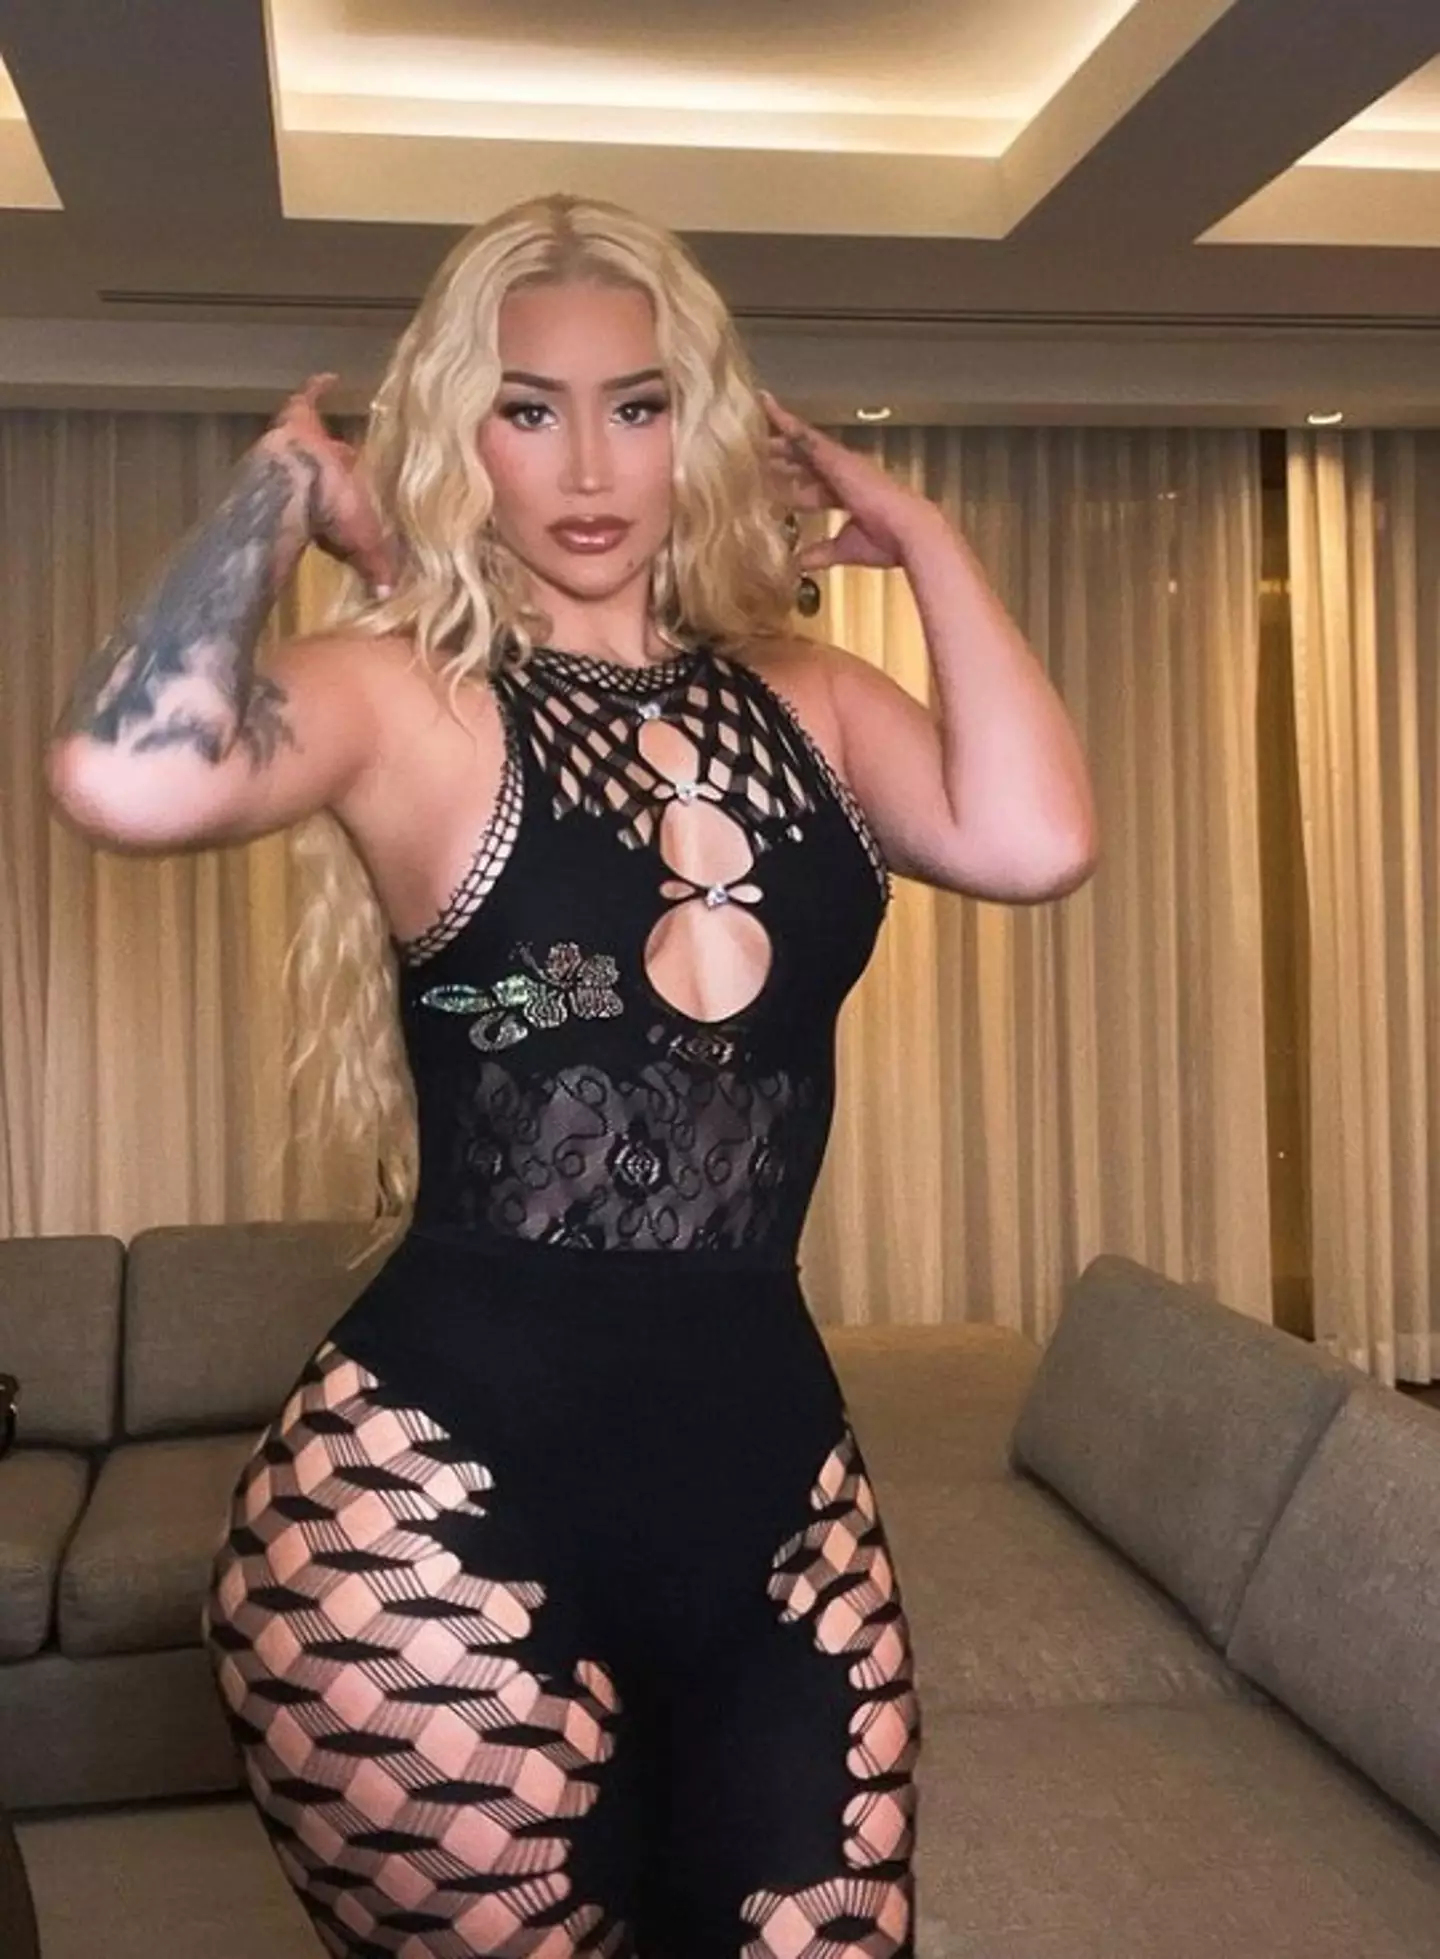 OnlyFans star Iggy Azalea has also suggested her time as a musician might be up.